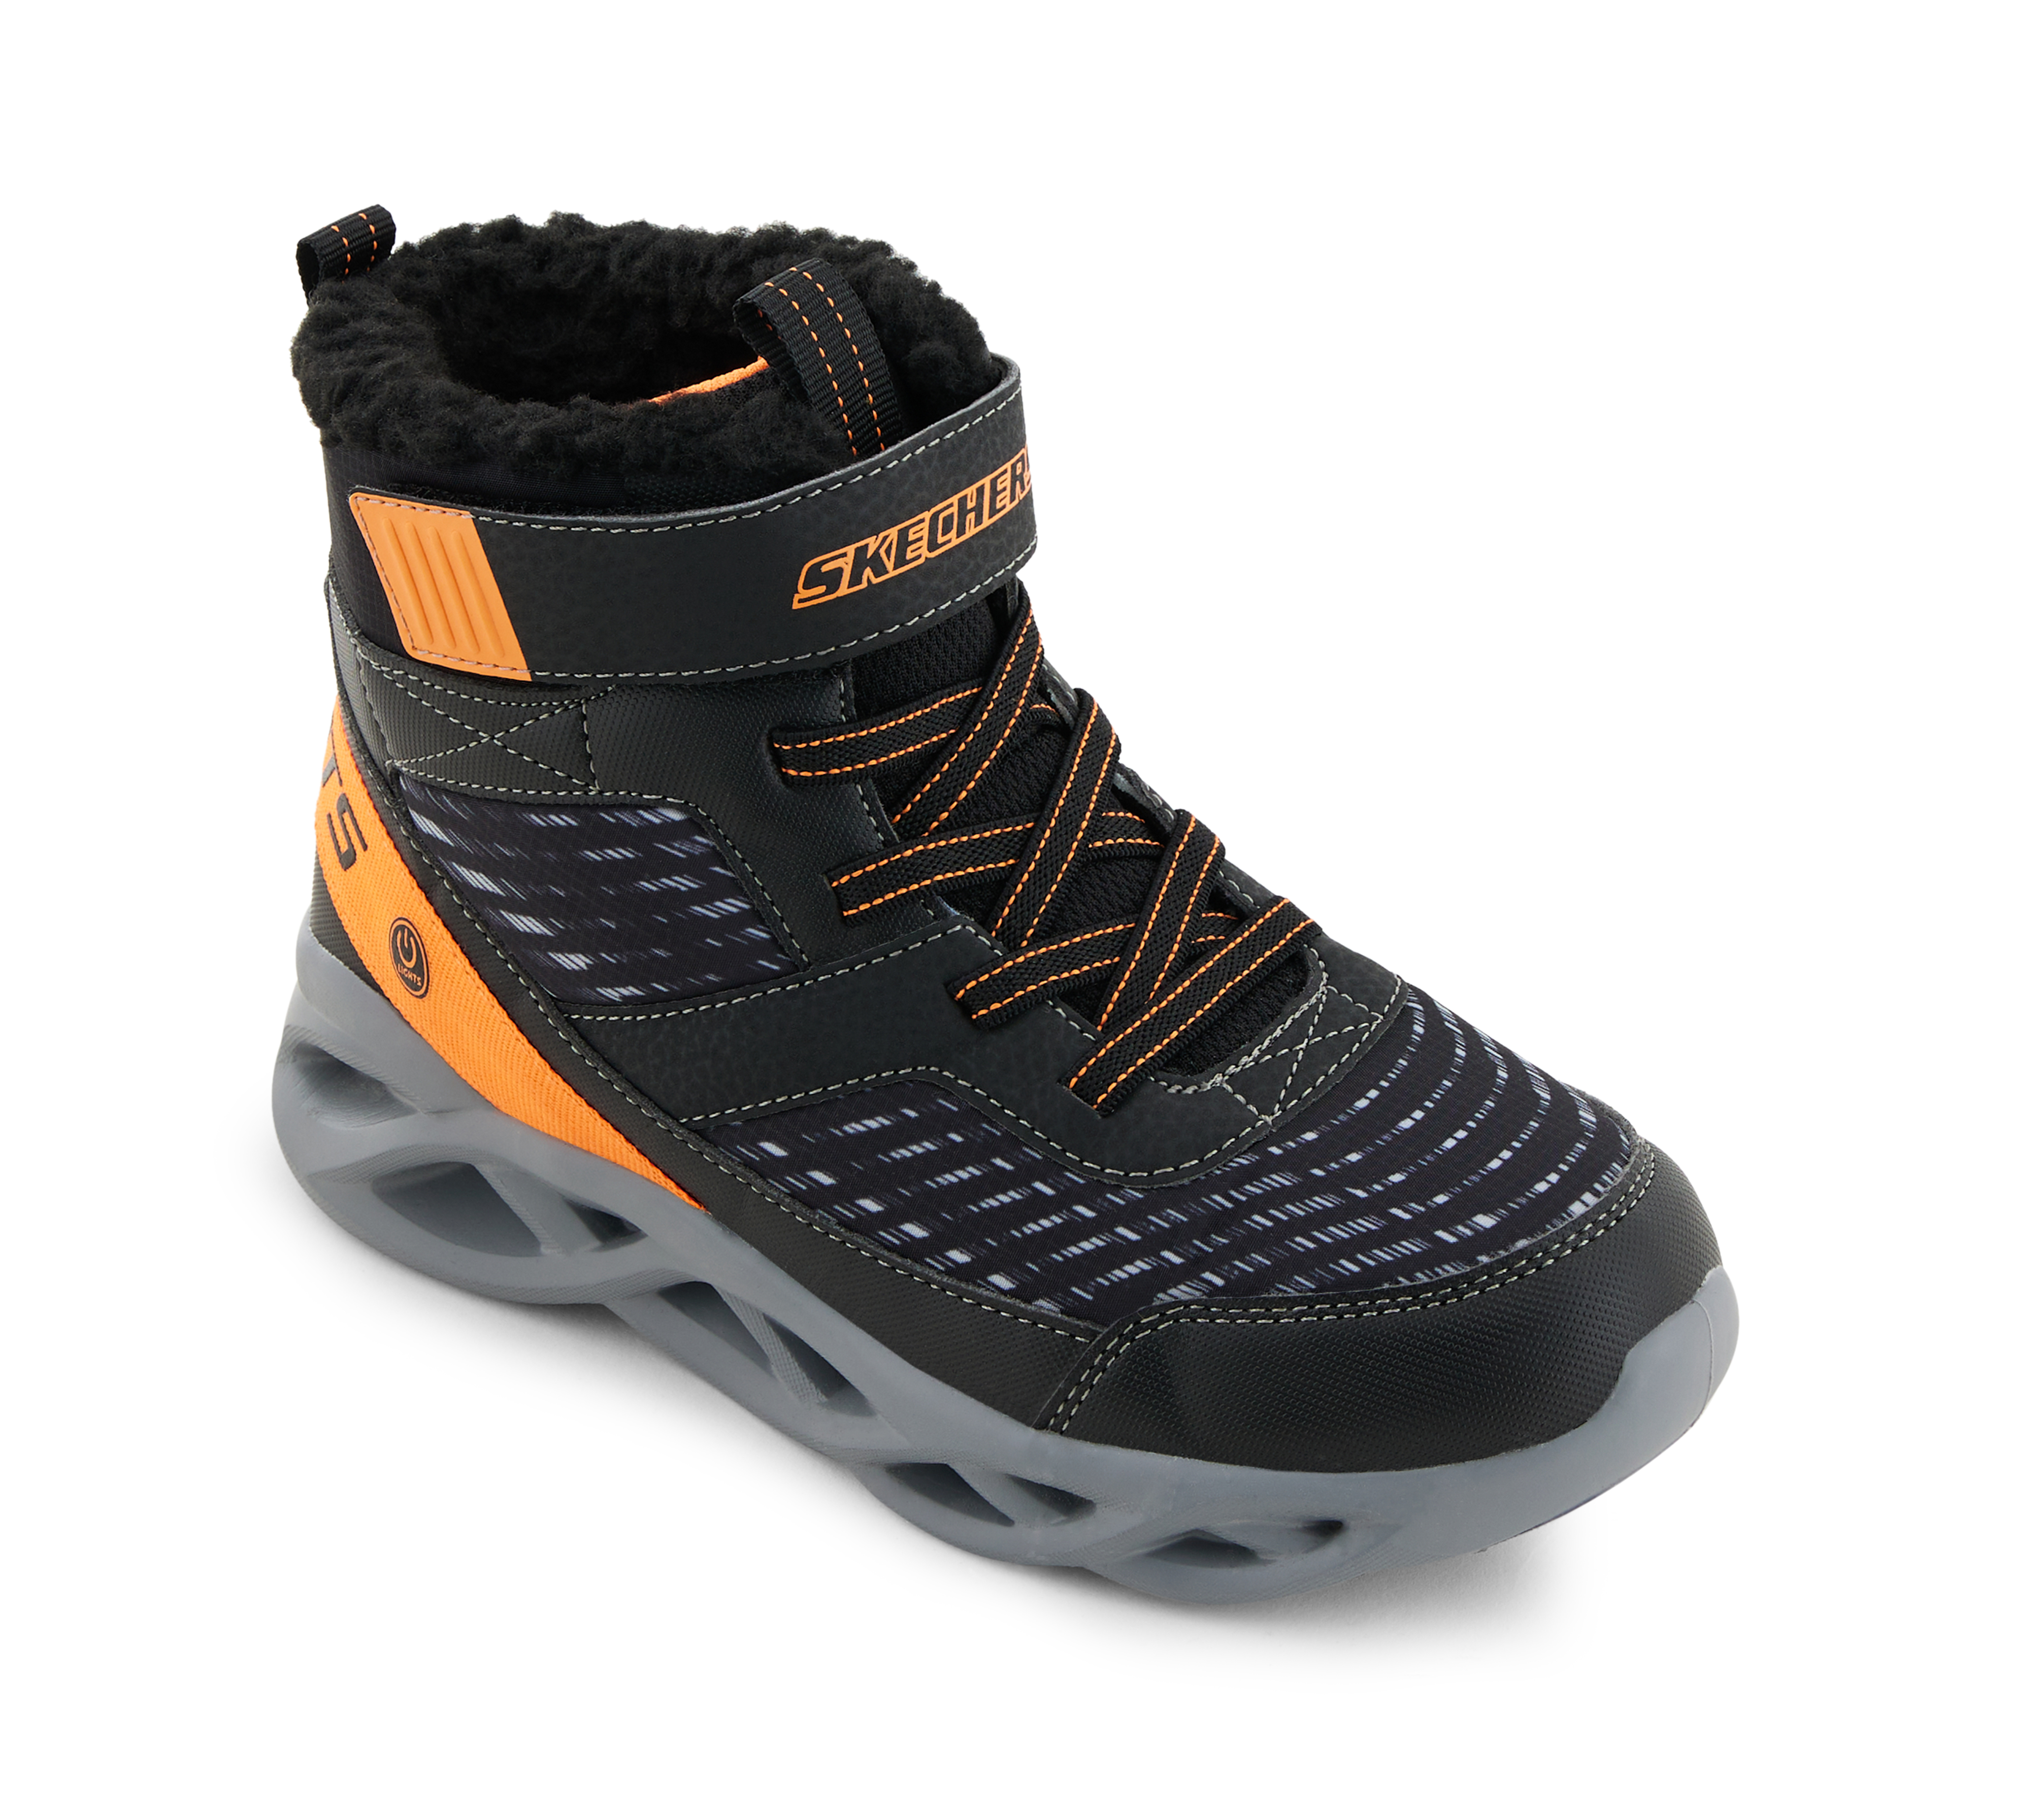 TWISTED-BRIGHTS - DROVOX, BLACK/ORANGE Footwear Lateral View